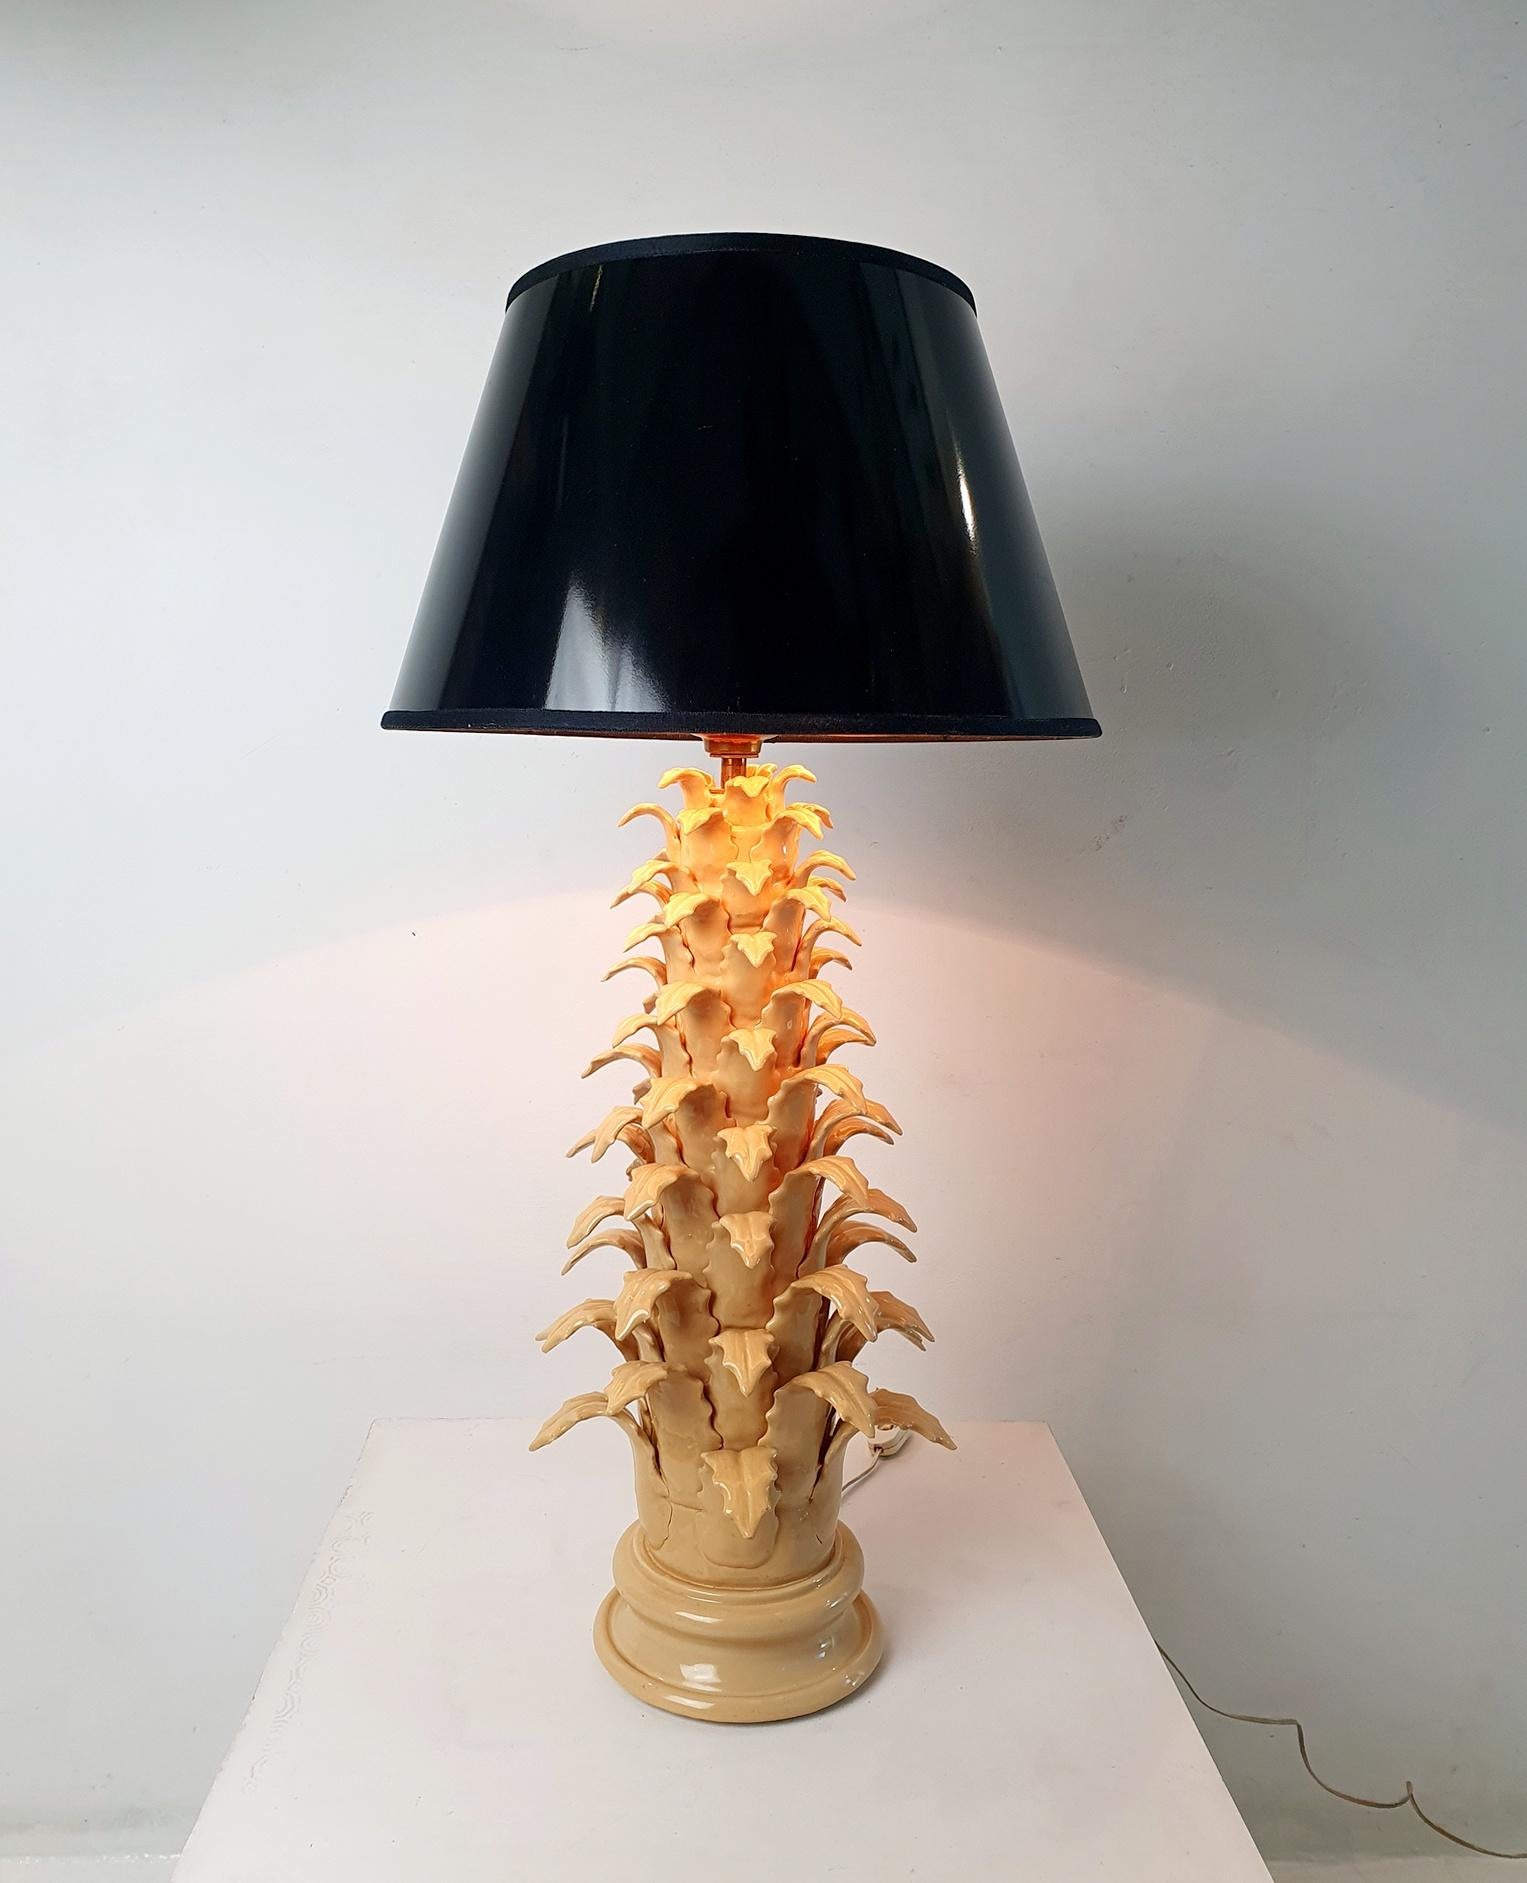 This is a 1970s nude colored ceramic table lamp produced in Spain. It has been paired with black lacquer lampshade witch is gold colored inside to reflect a golden light. It is very tall and is a decorative piece in it's own right.